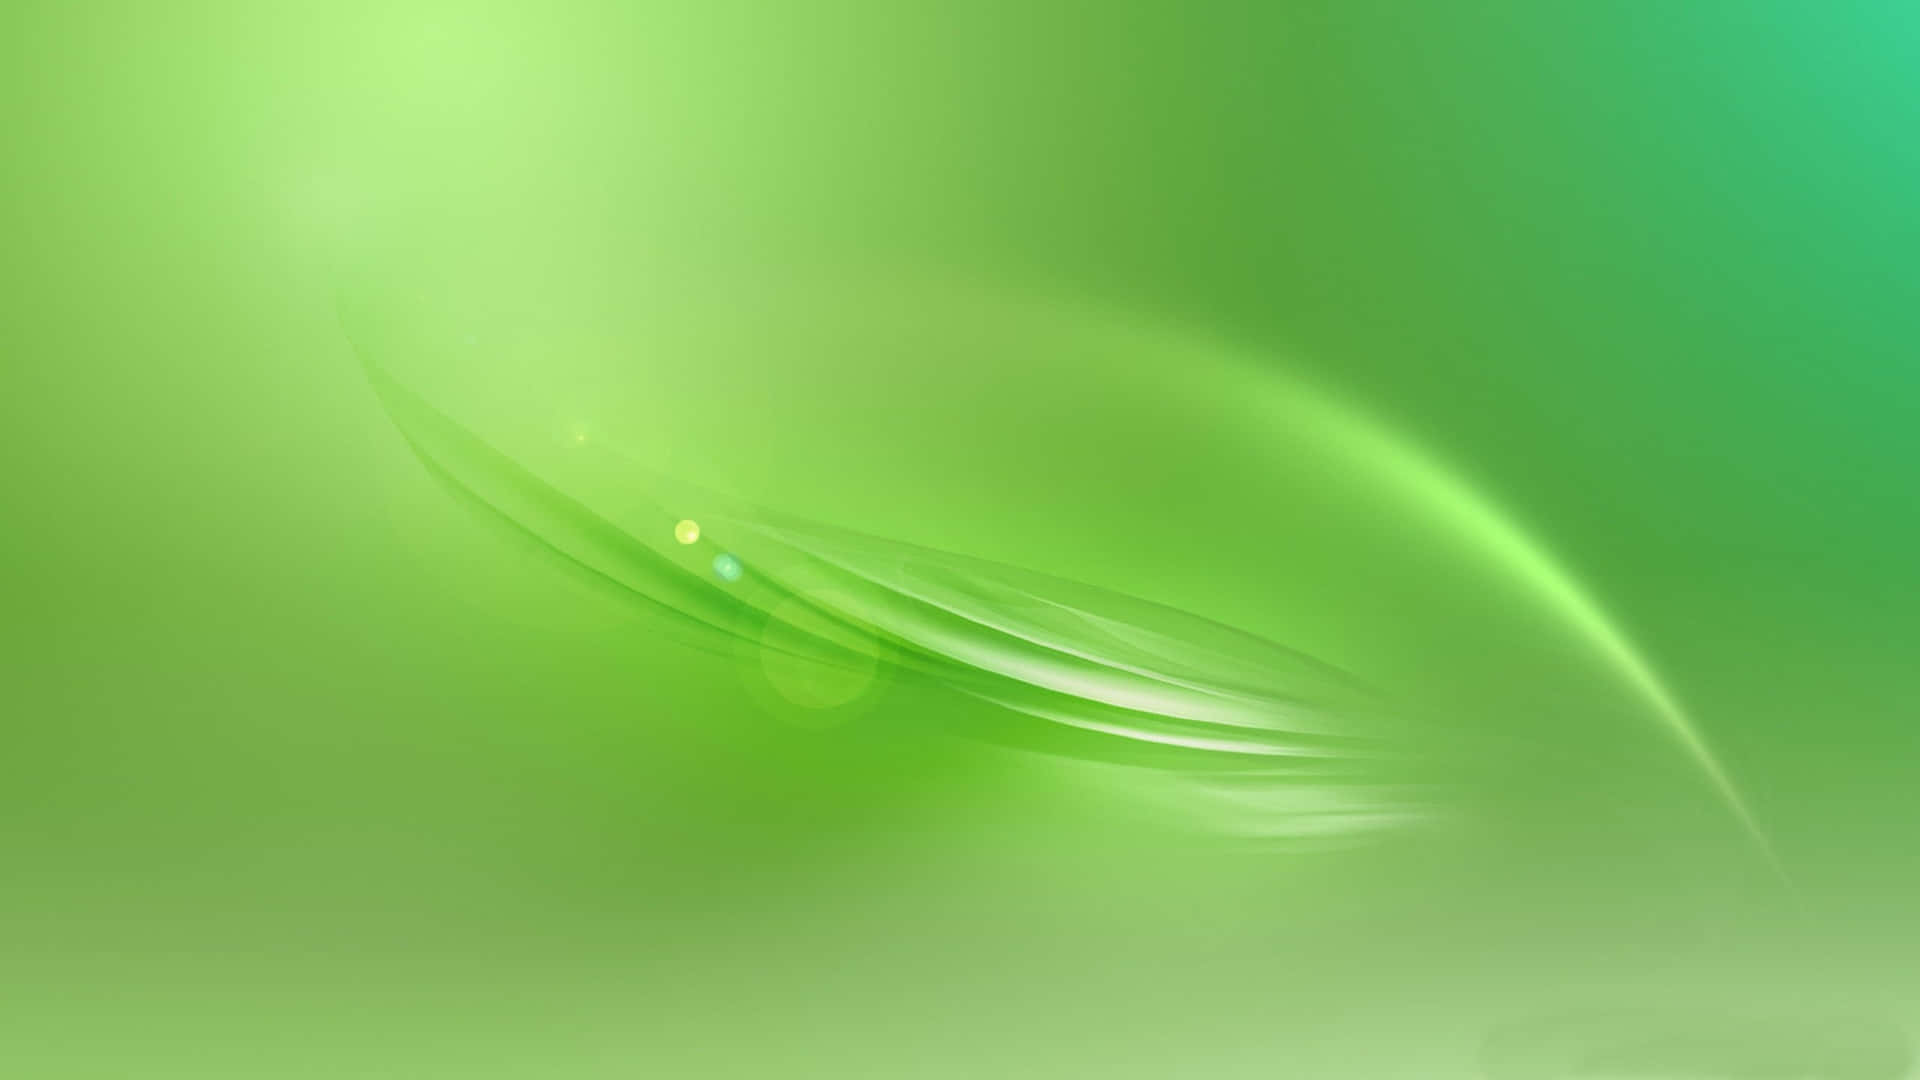 "Bring some calming colors to your workspace with a Green Desktop background" Wallpaper